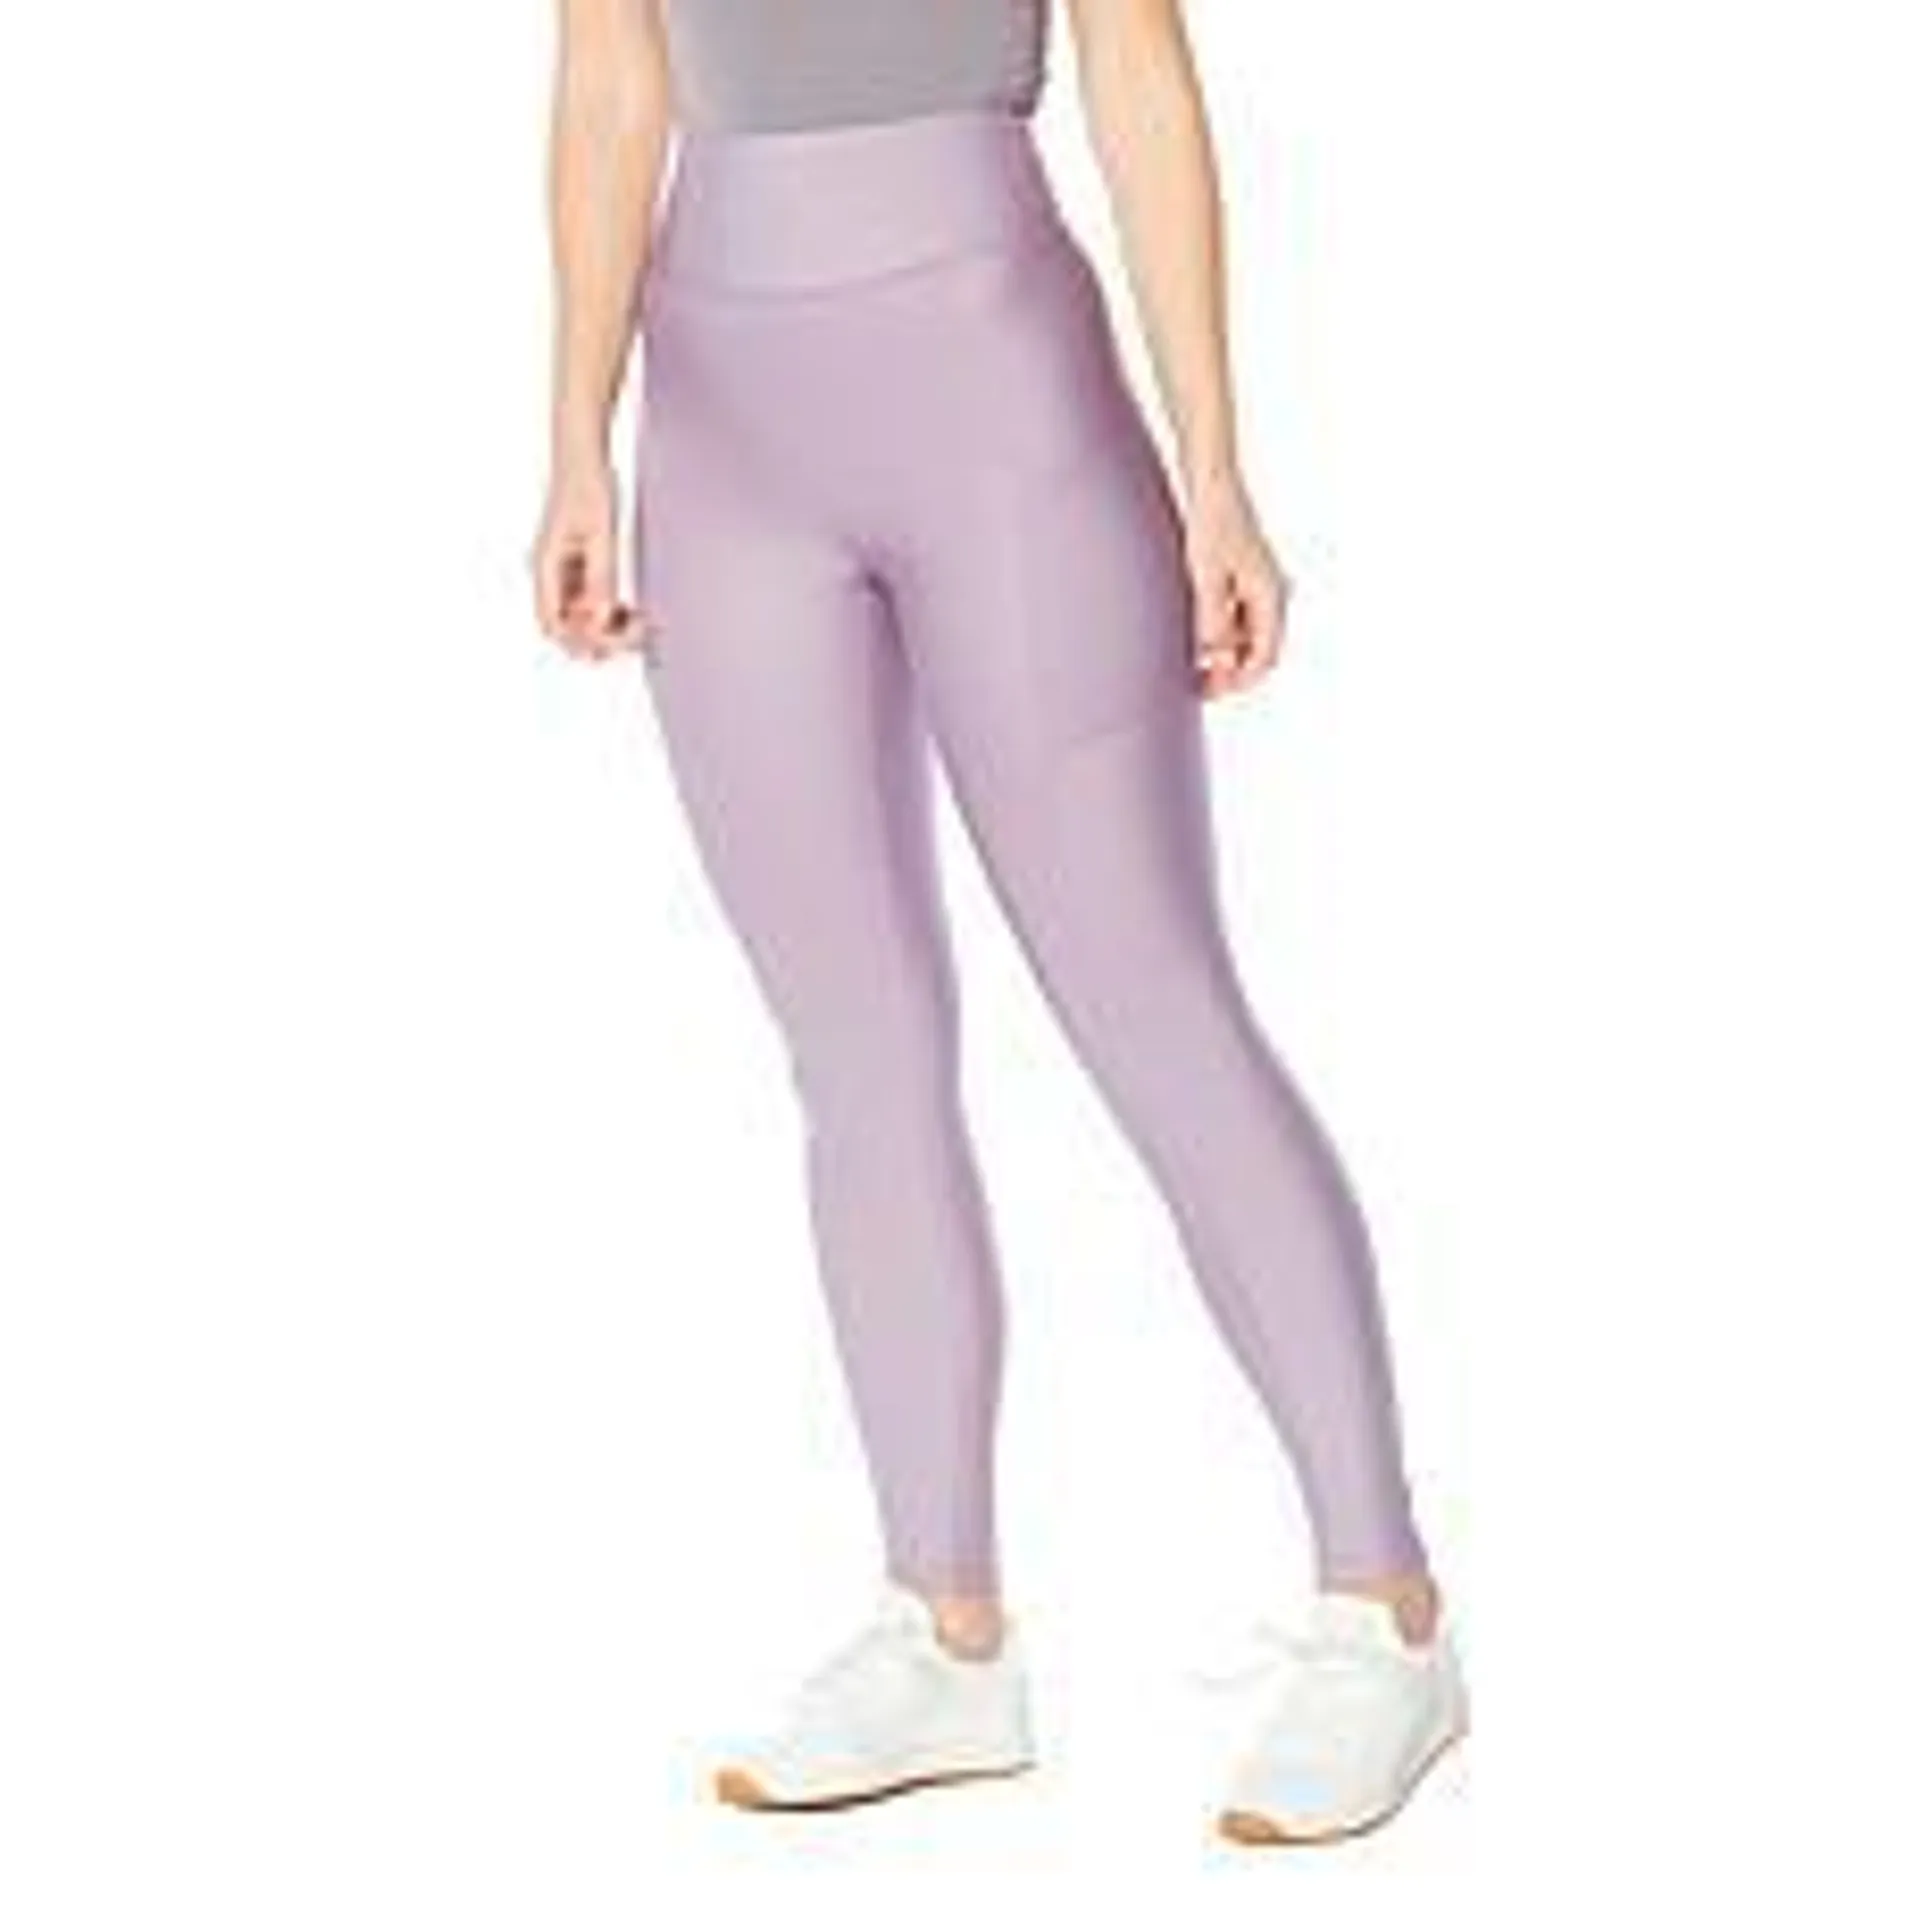 G by Giuliana LounGy Smoothing Core Legging